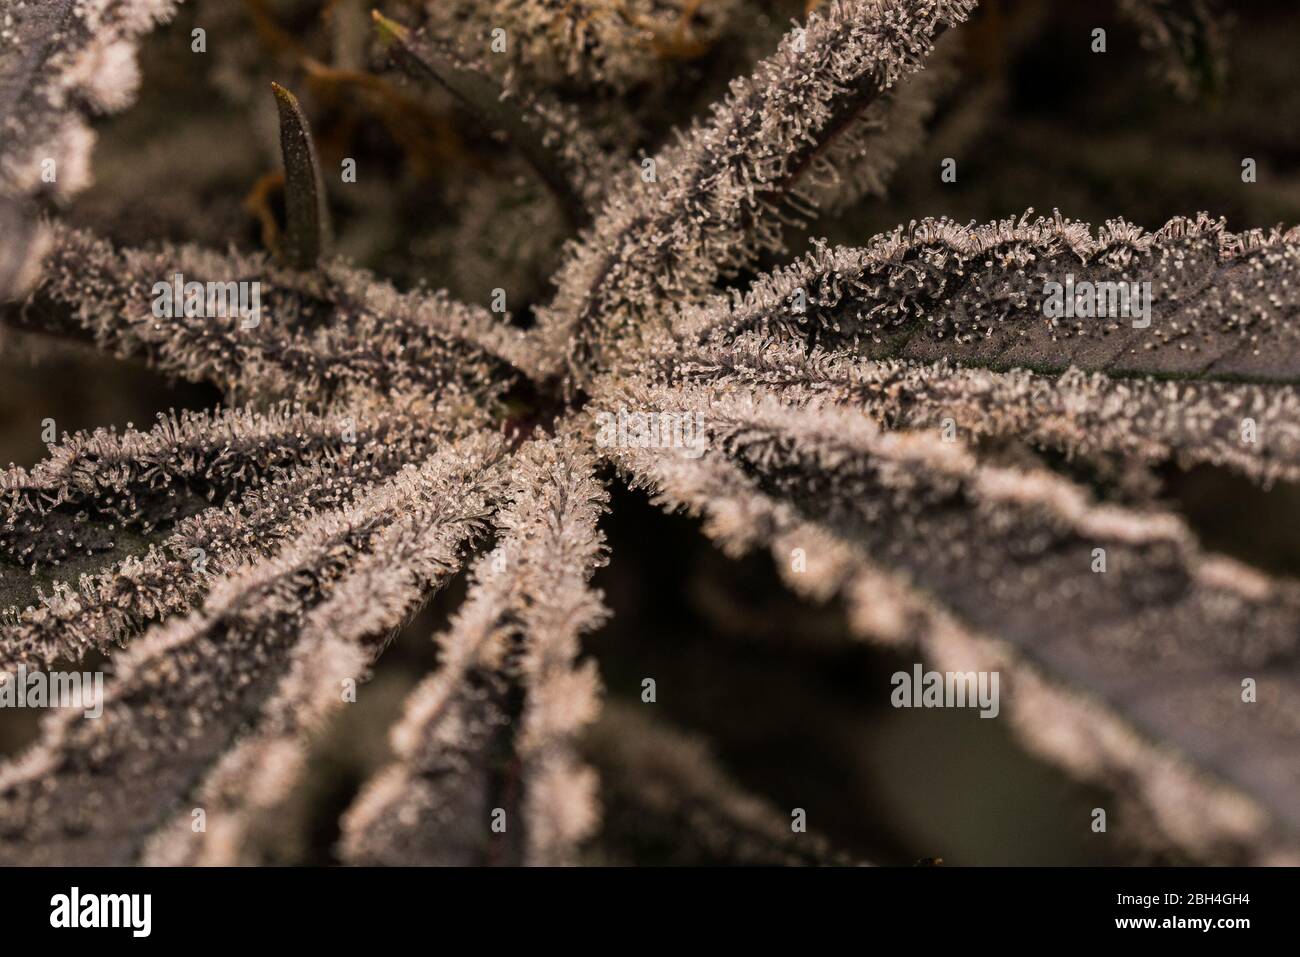 Close-up image of high quality cannabis leaf nearing time for harvest Stock Photo